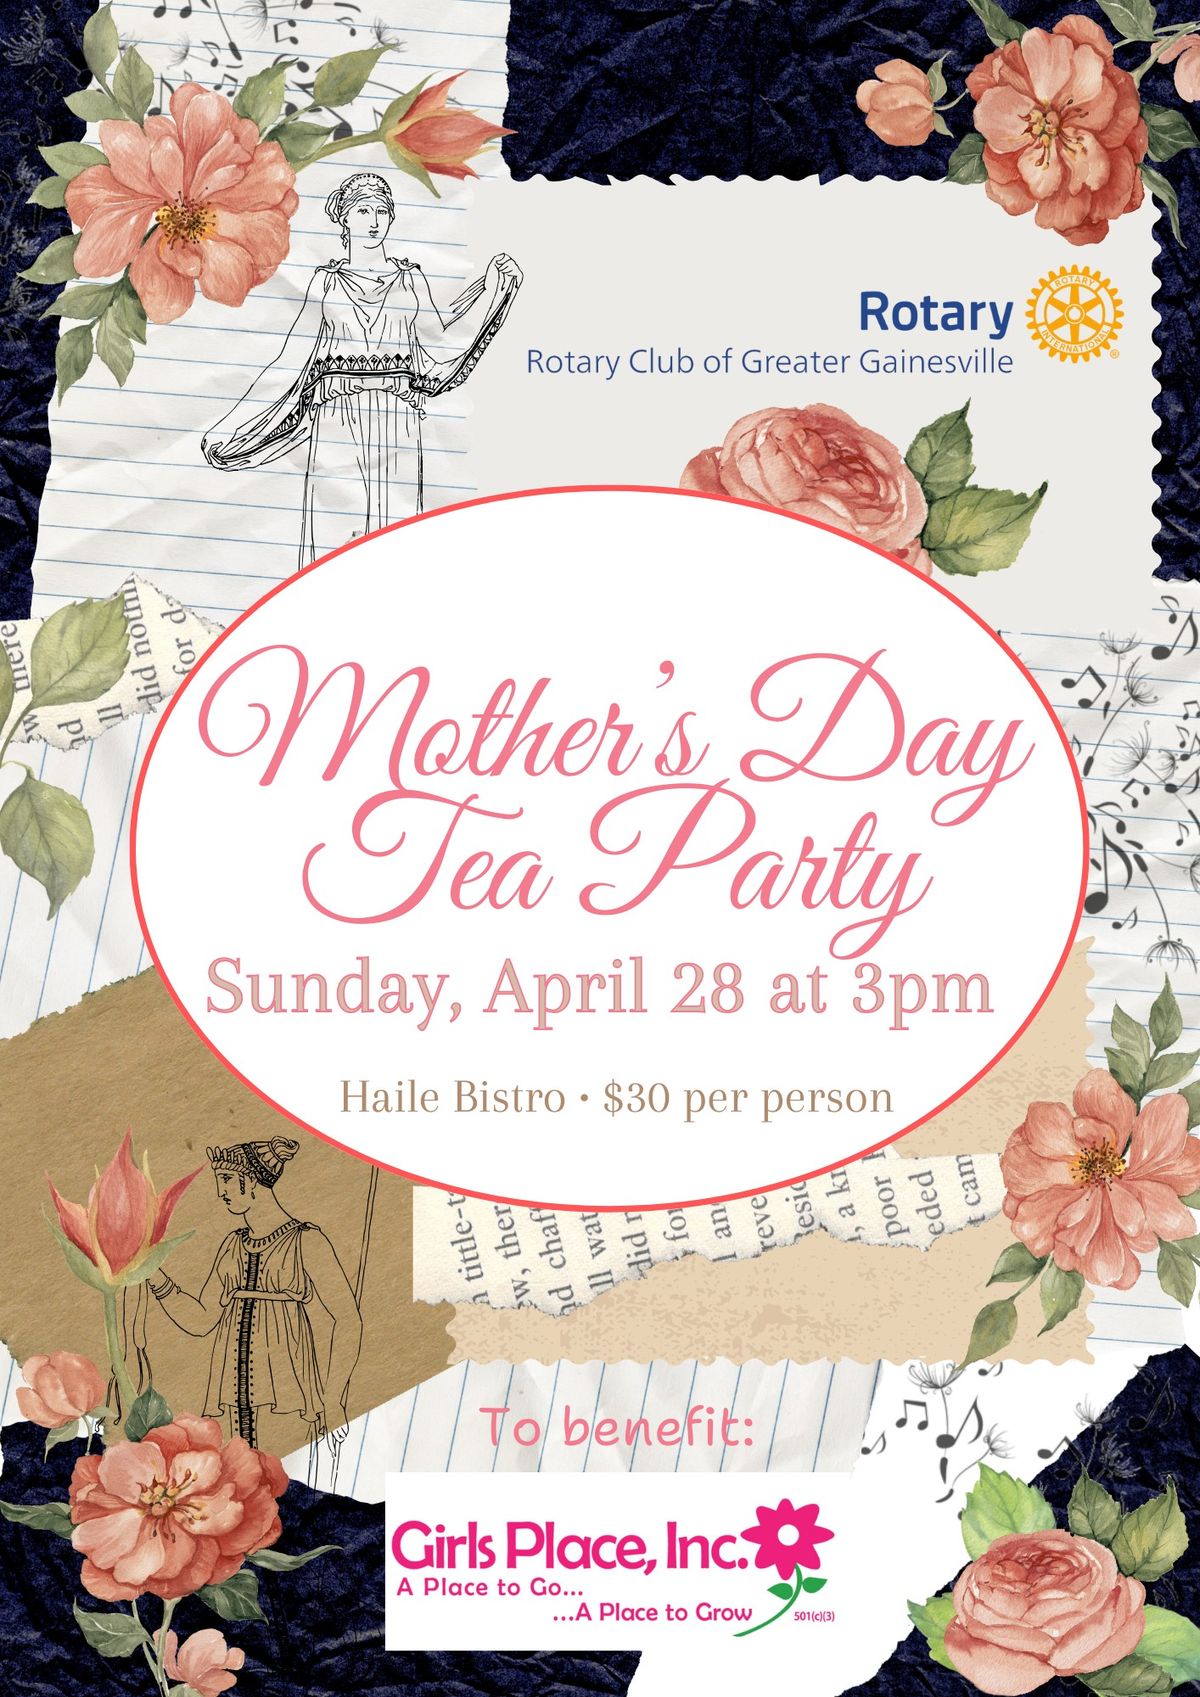 Rotary Club of Greater Gainesville Mother's Day Tea Party to benefit Girls Place